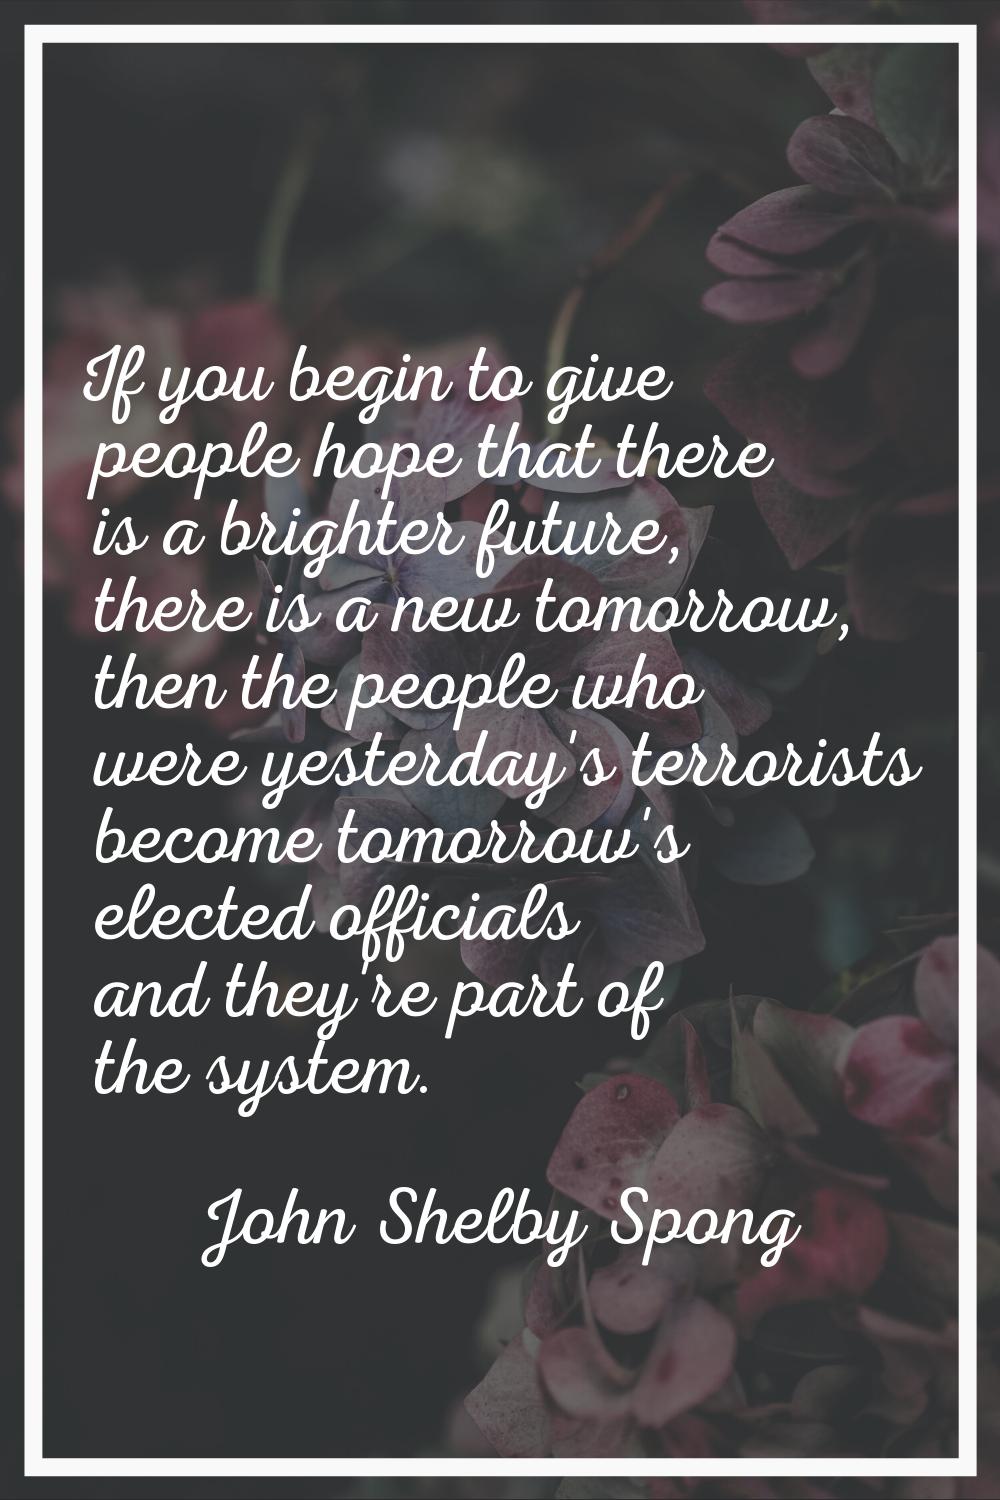 If you begin to give people hope that there is a brighter future, there is a new tomorrow, then the